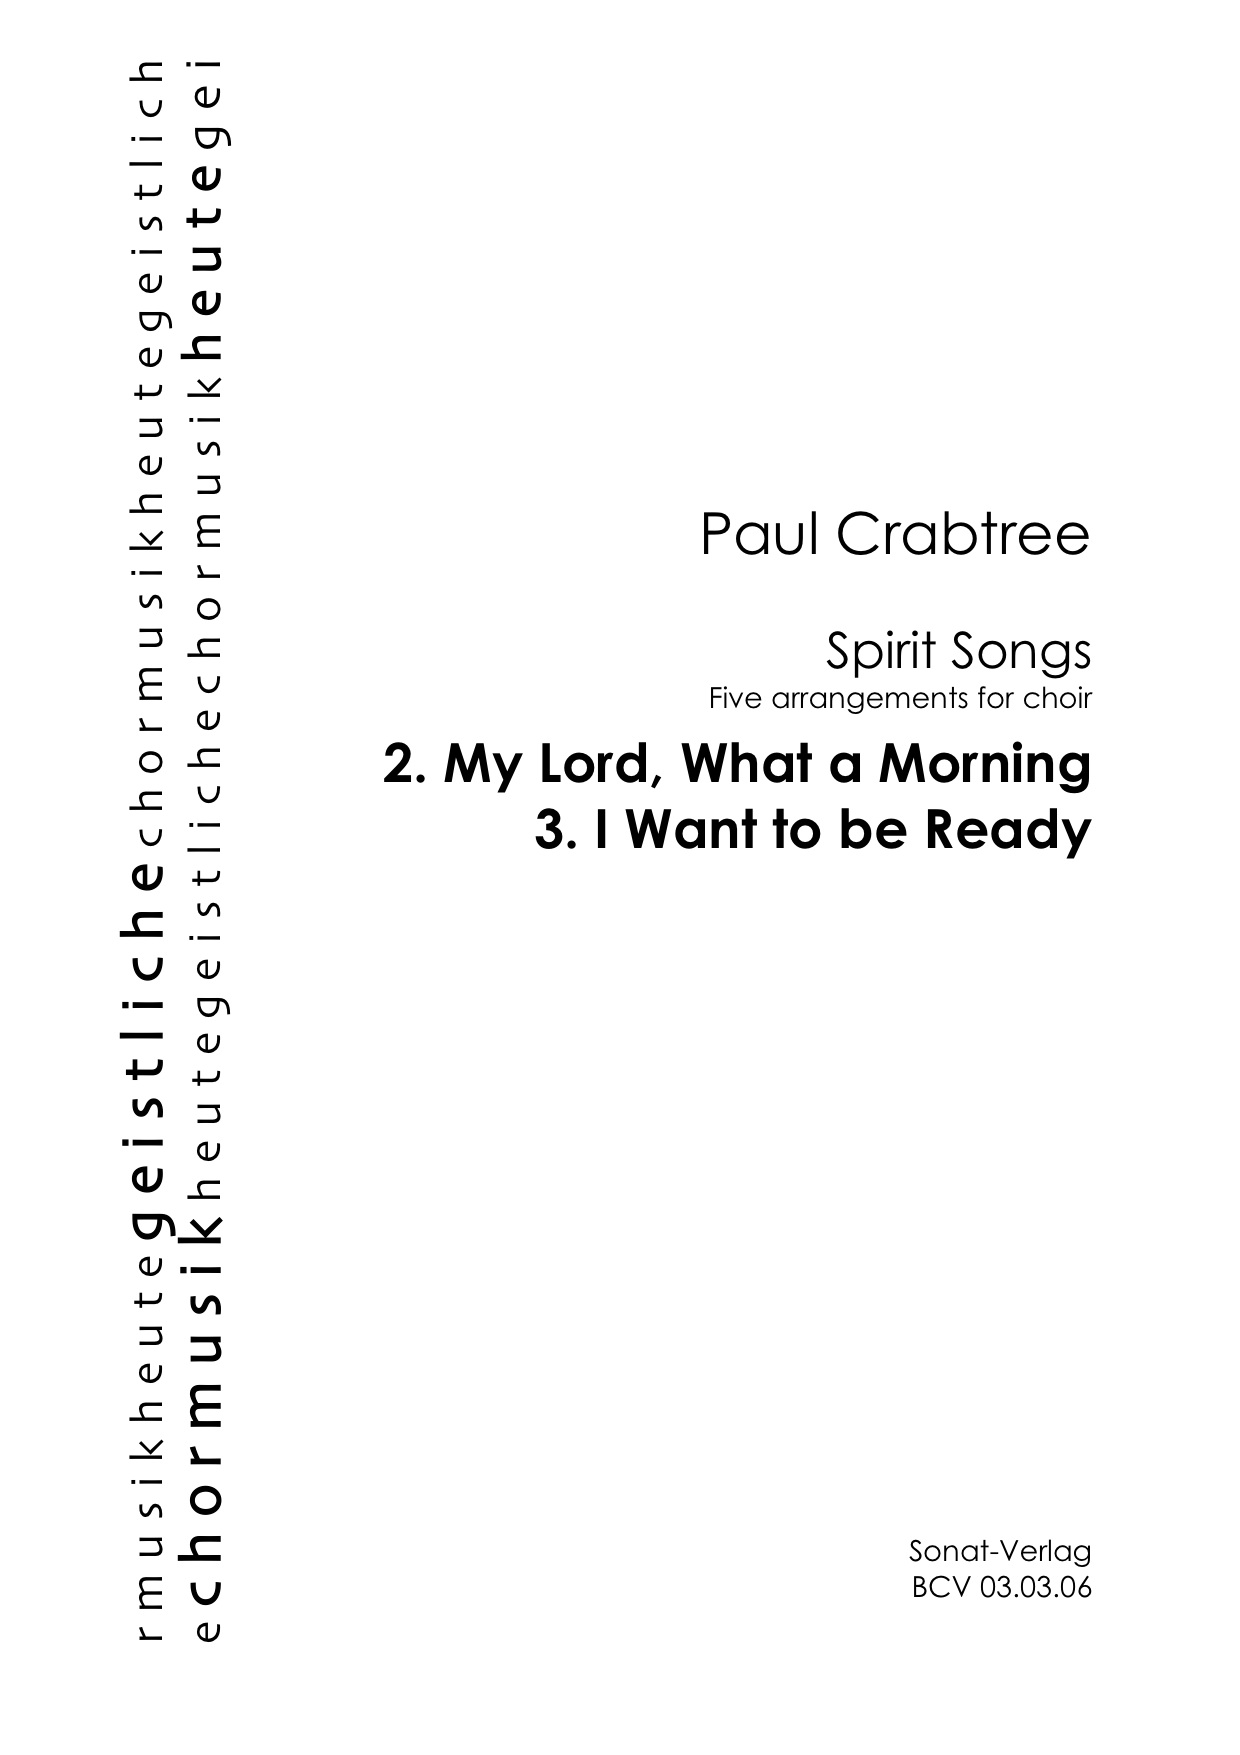 My Lord, What a Morning; I Want to be Ready